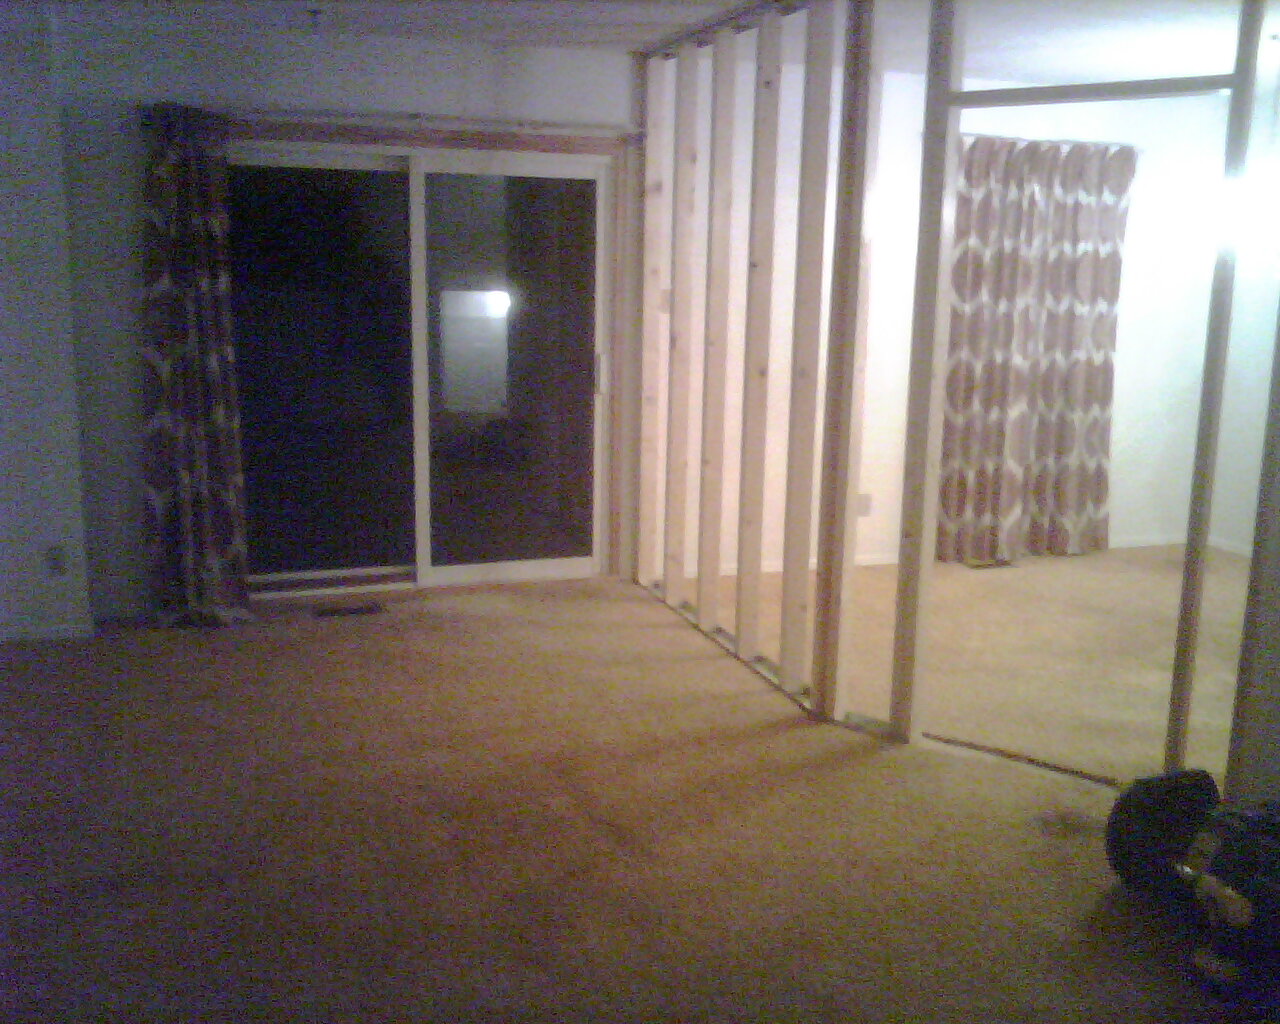 The living room's back end as seen from near the entrance stairs (the beams are for the room being constructed on the first floor)